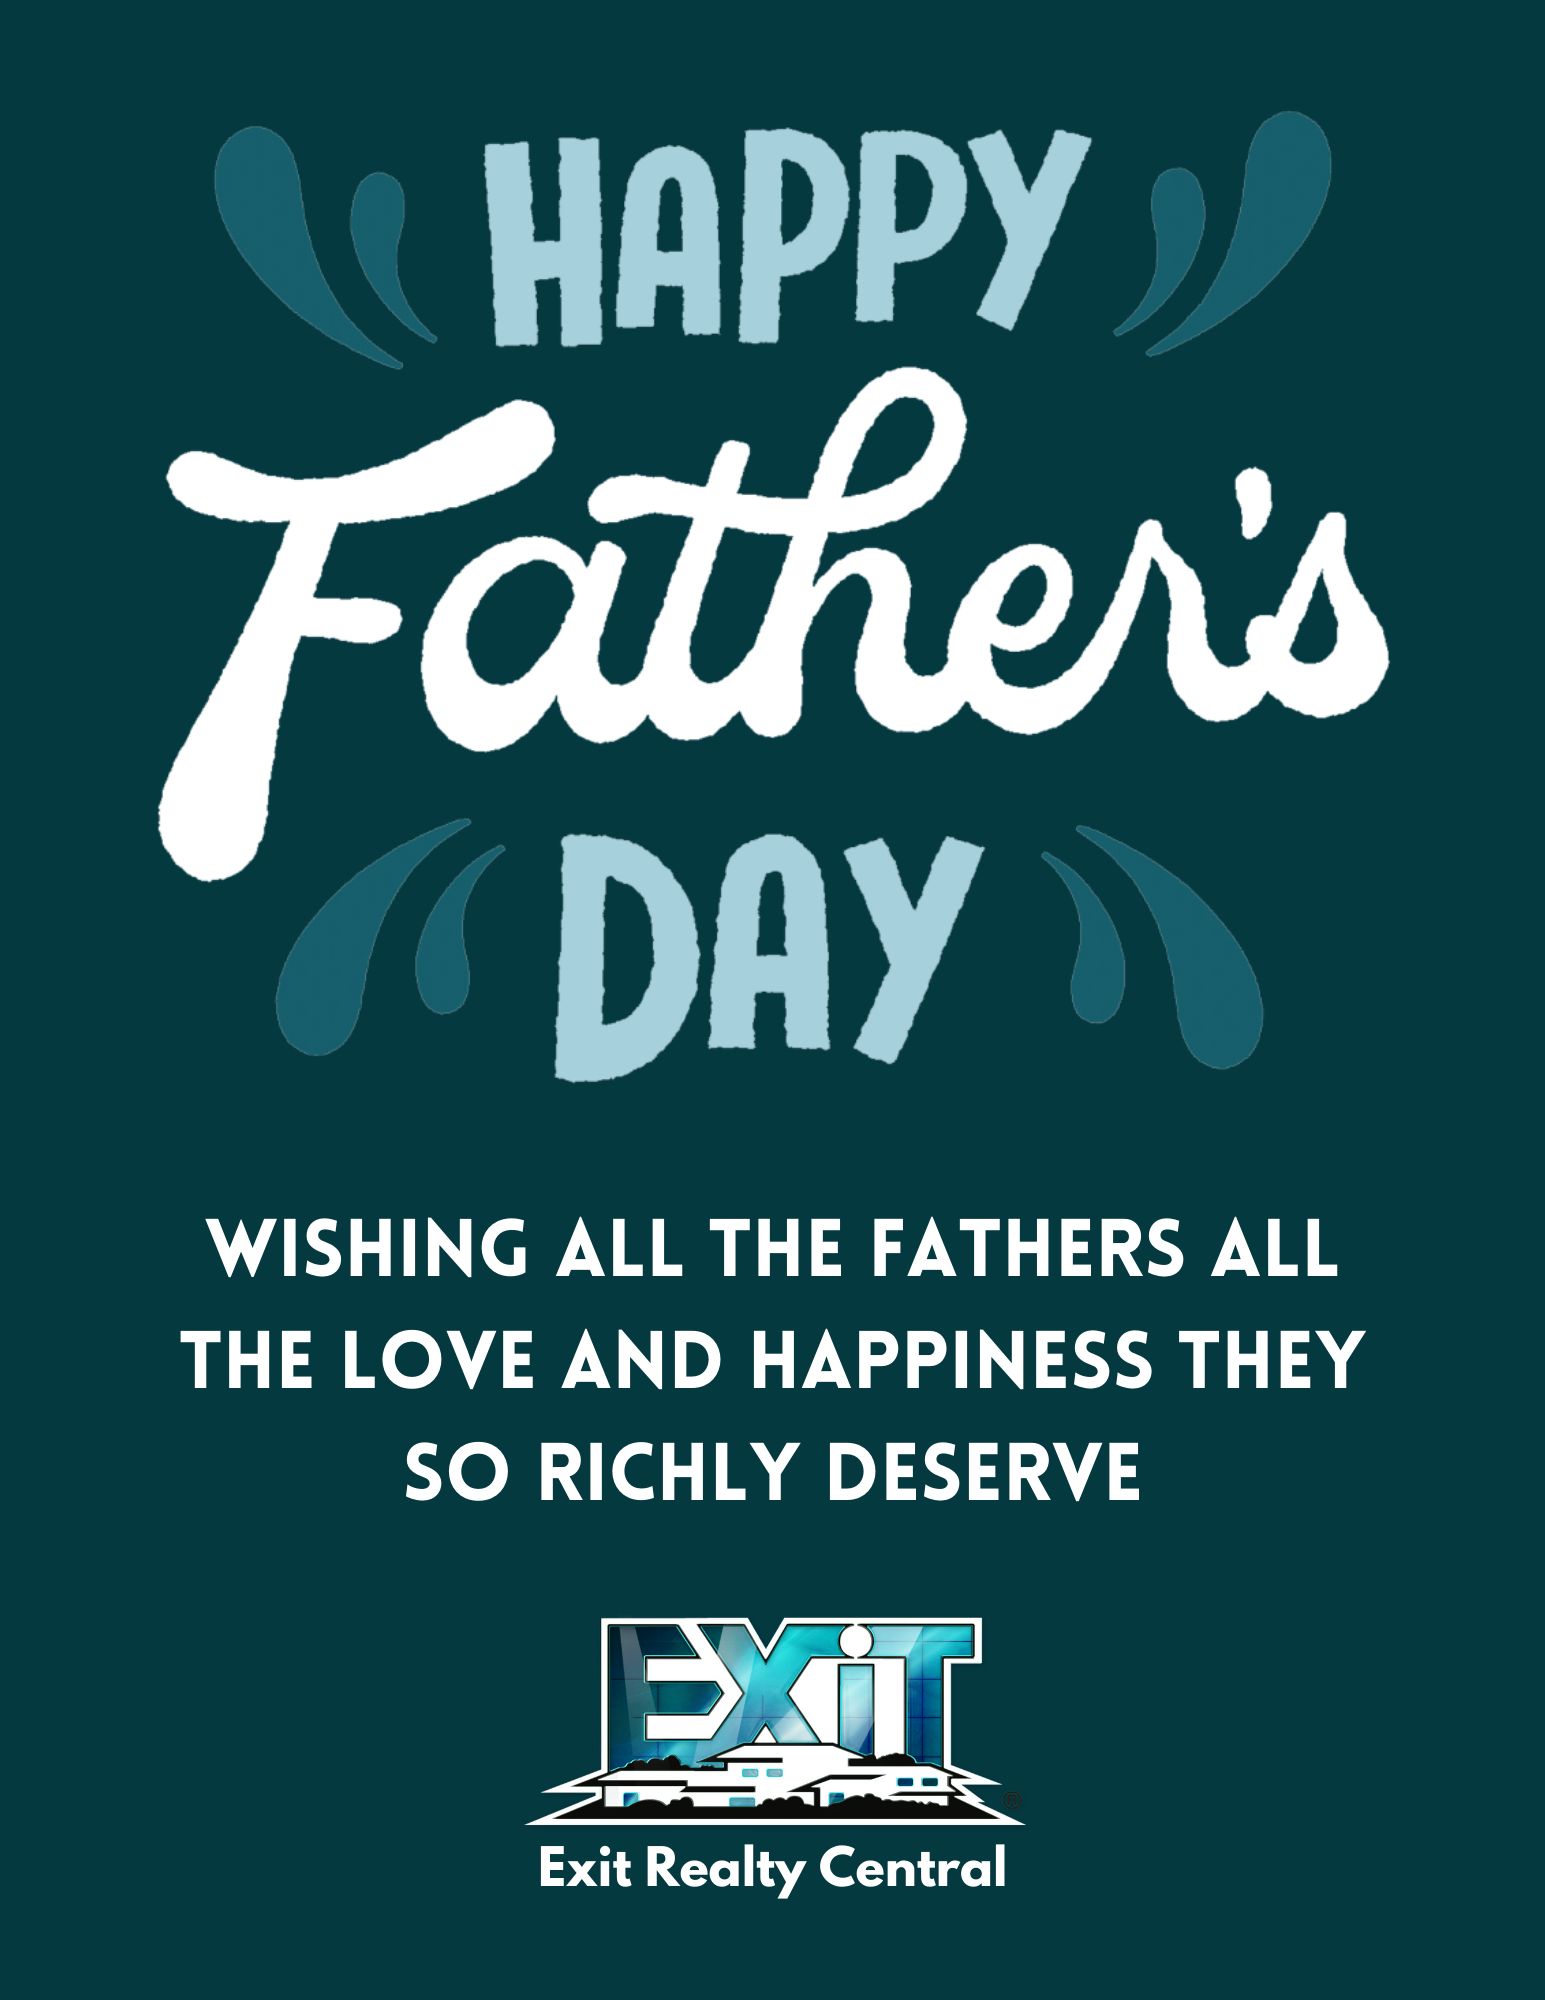 Wishing all fathers, a wonderful Father's Day